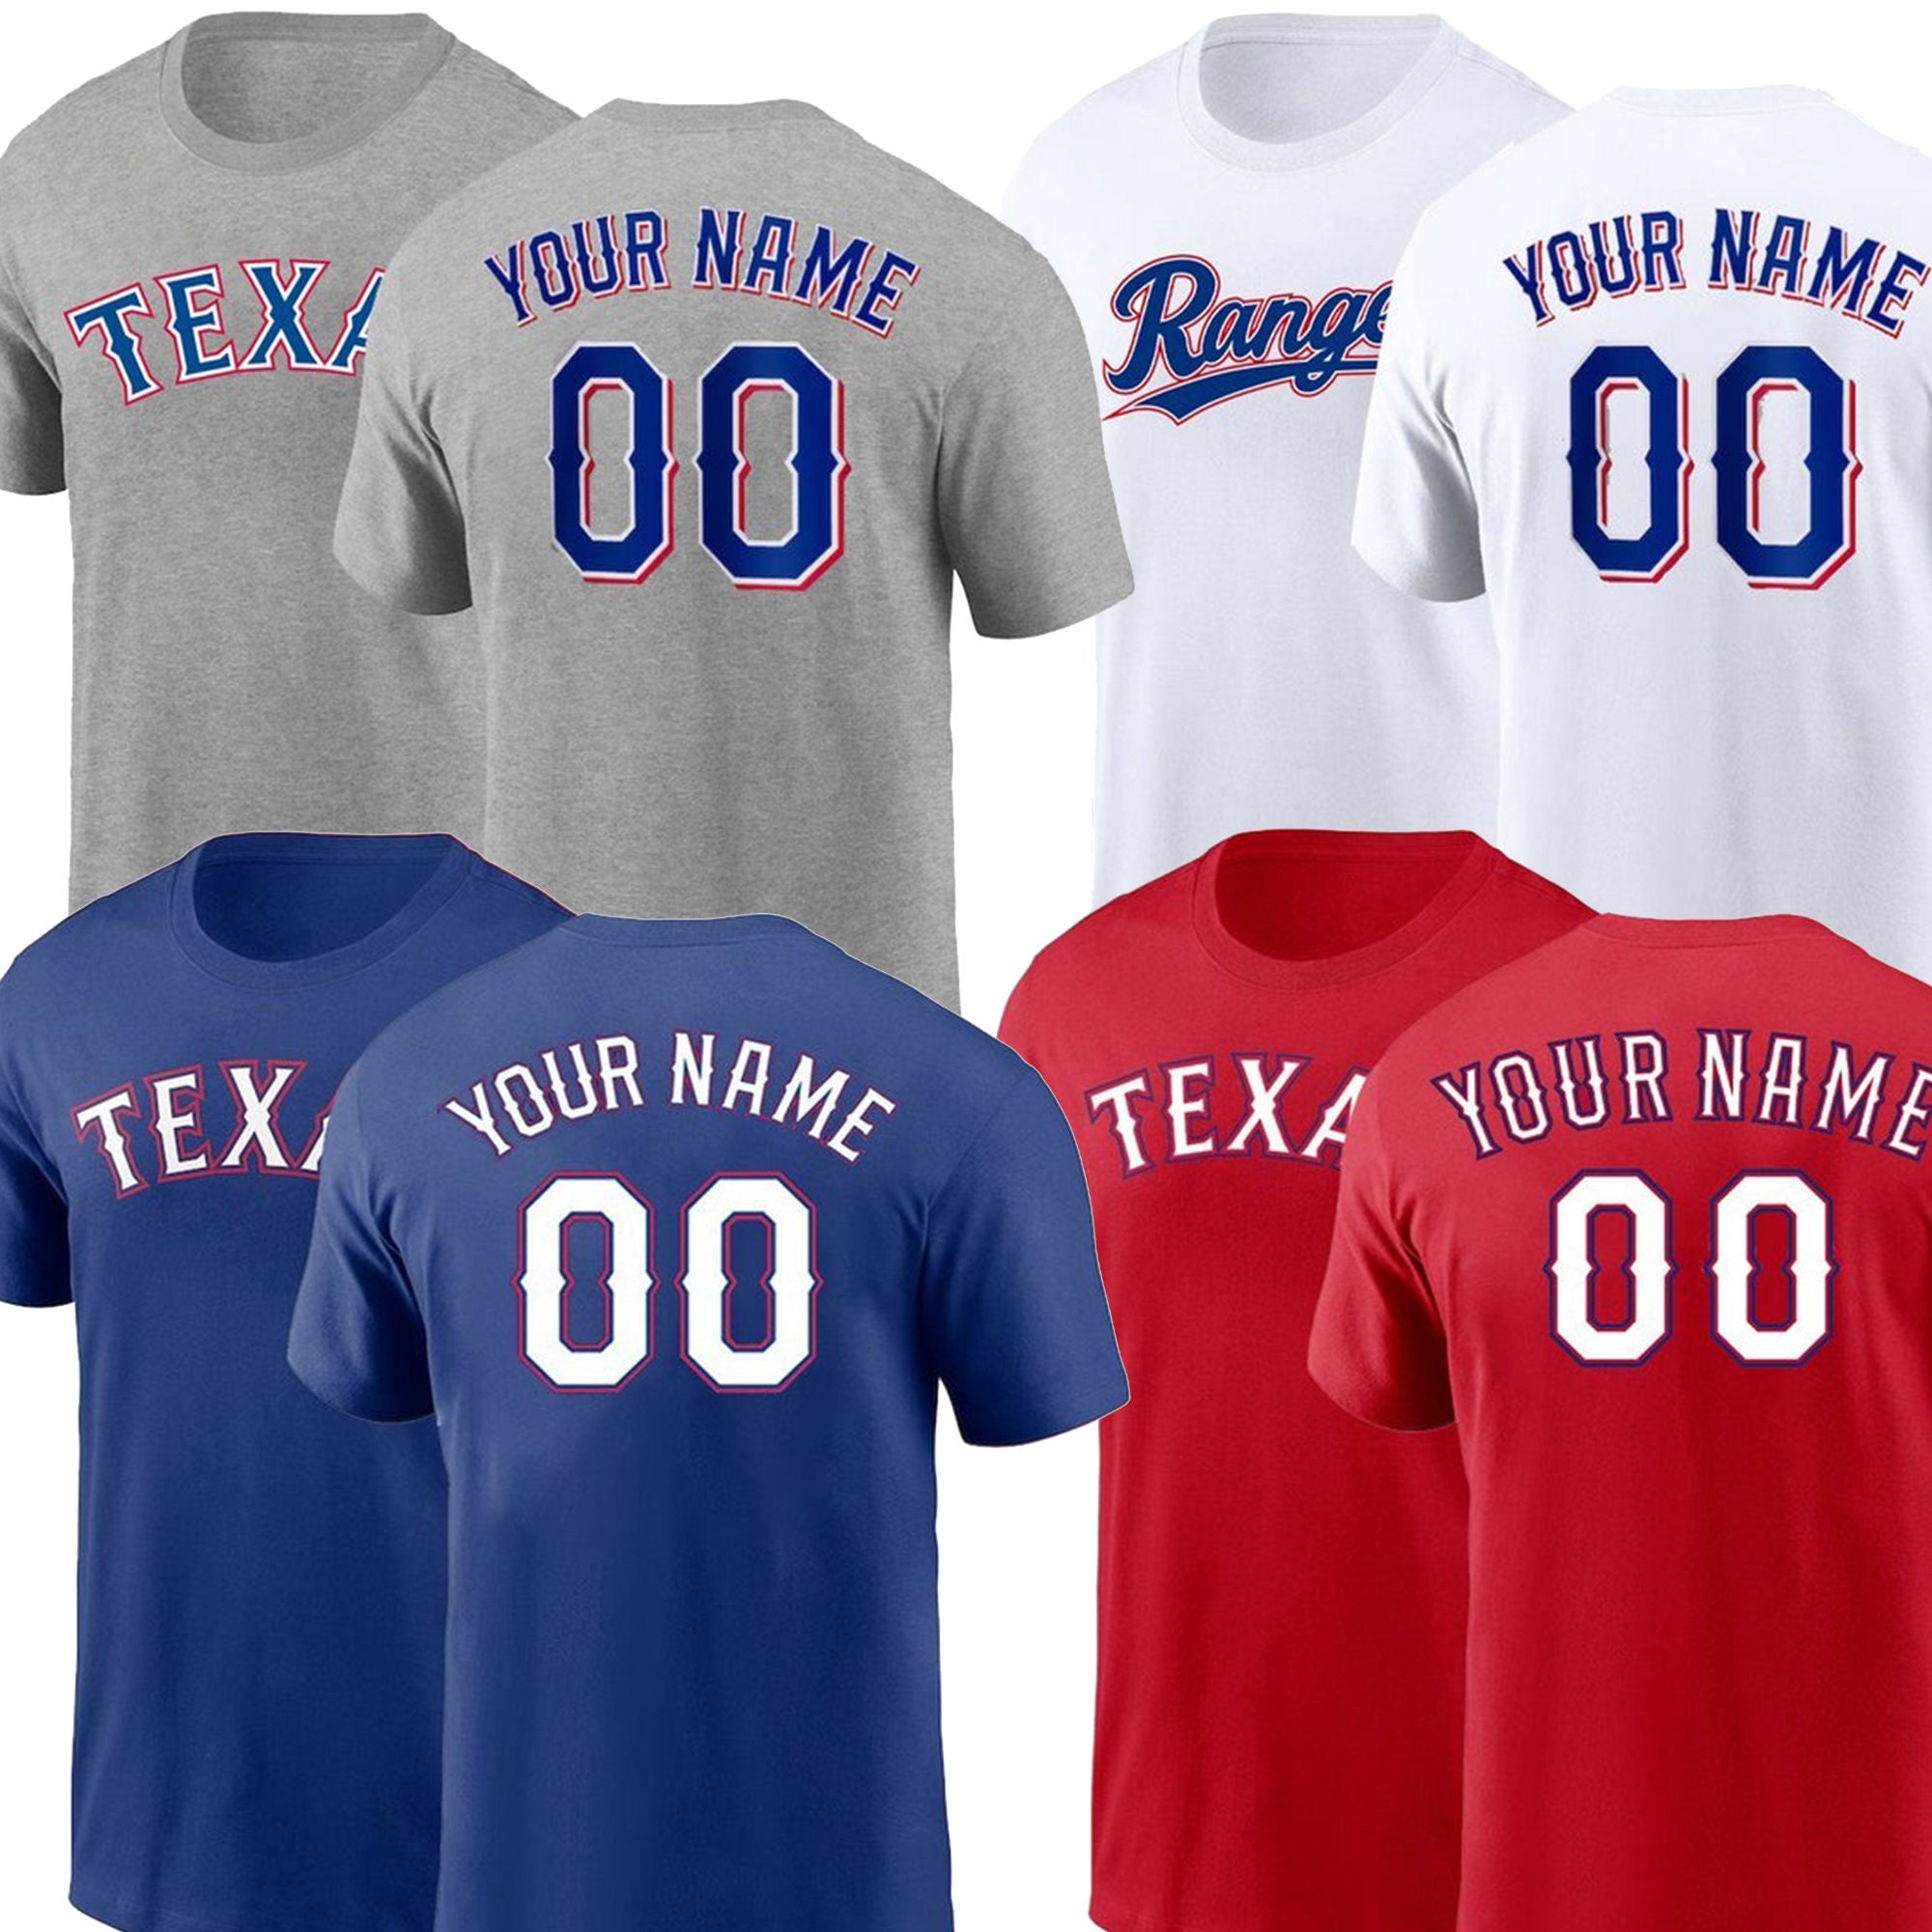 Texas Rangers: 2007 Blue Majestic Stitched Jersey (L) – National